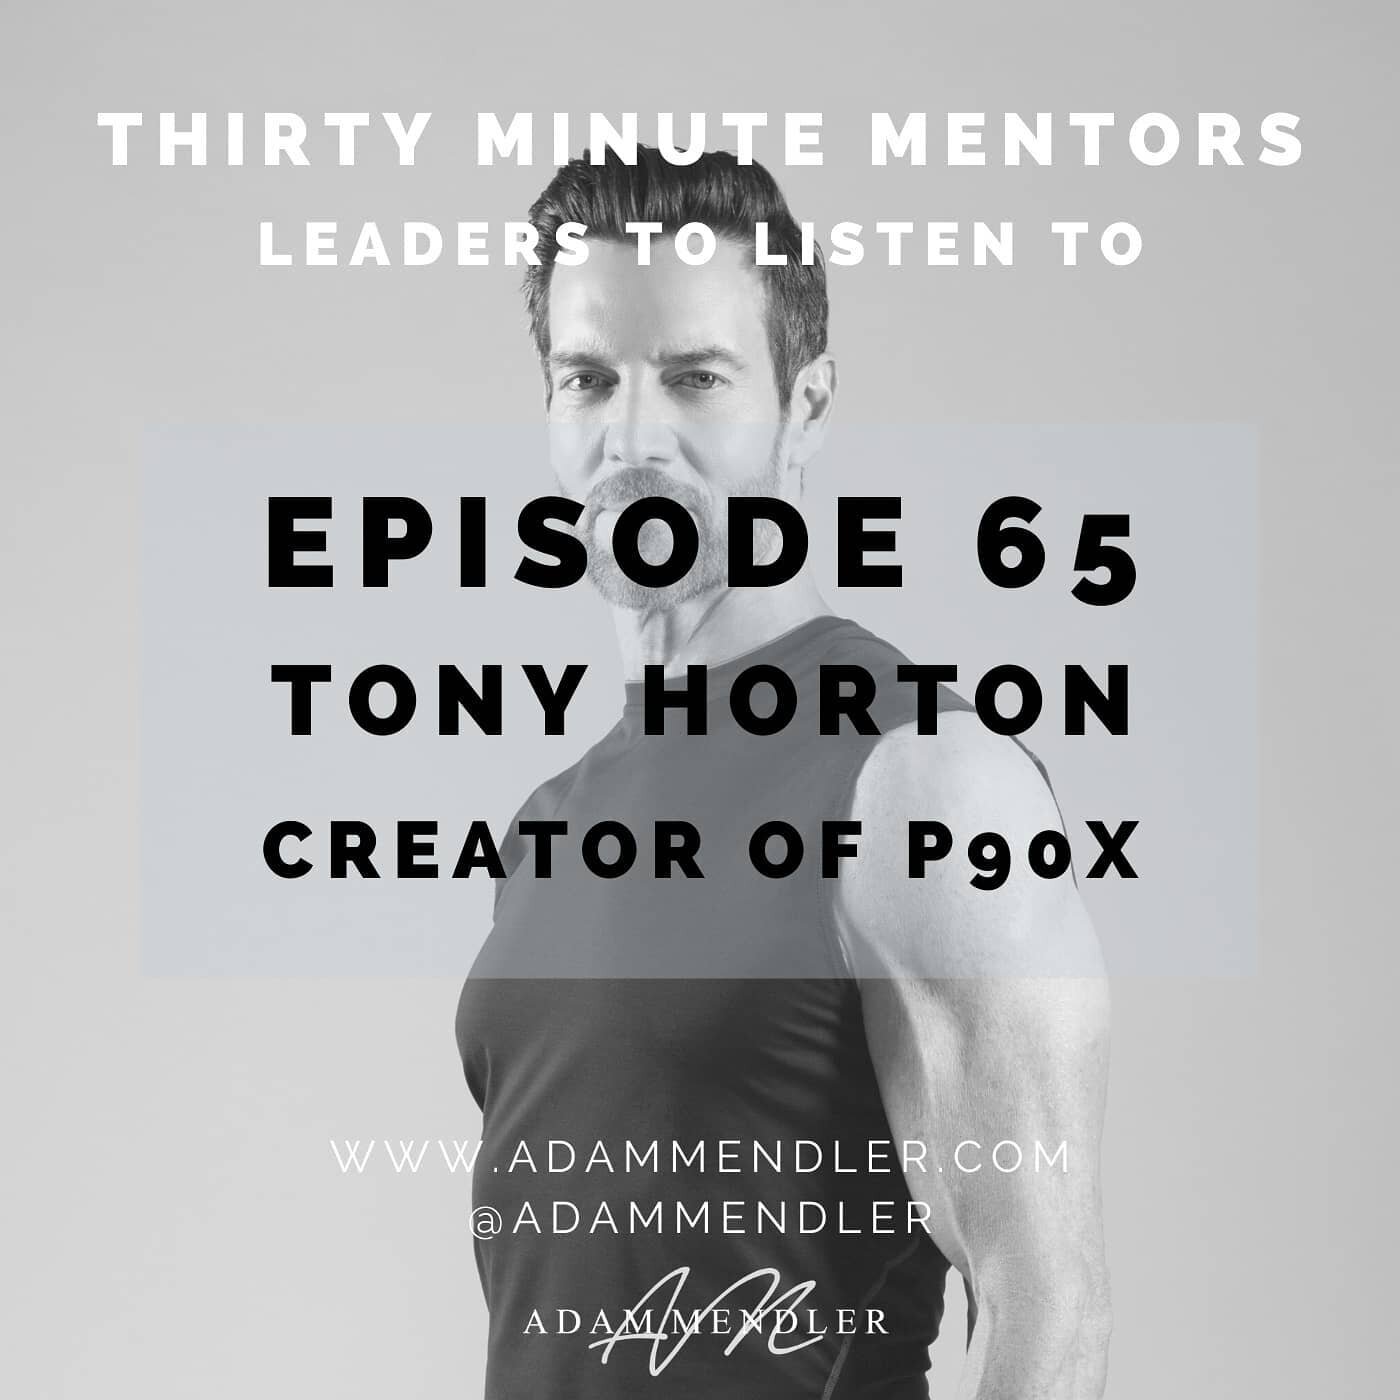 Before becoming one of America&rsquo;s leading fitness experts and creating&nbsp;P90X - the disruptive workout program that has grossed hundreds of millions of dollars - Tony Horton spent more than two decades working through a long list of less glam